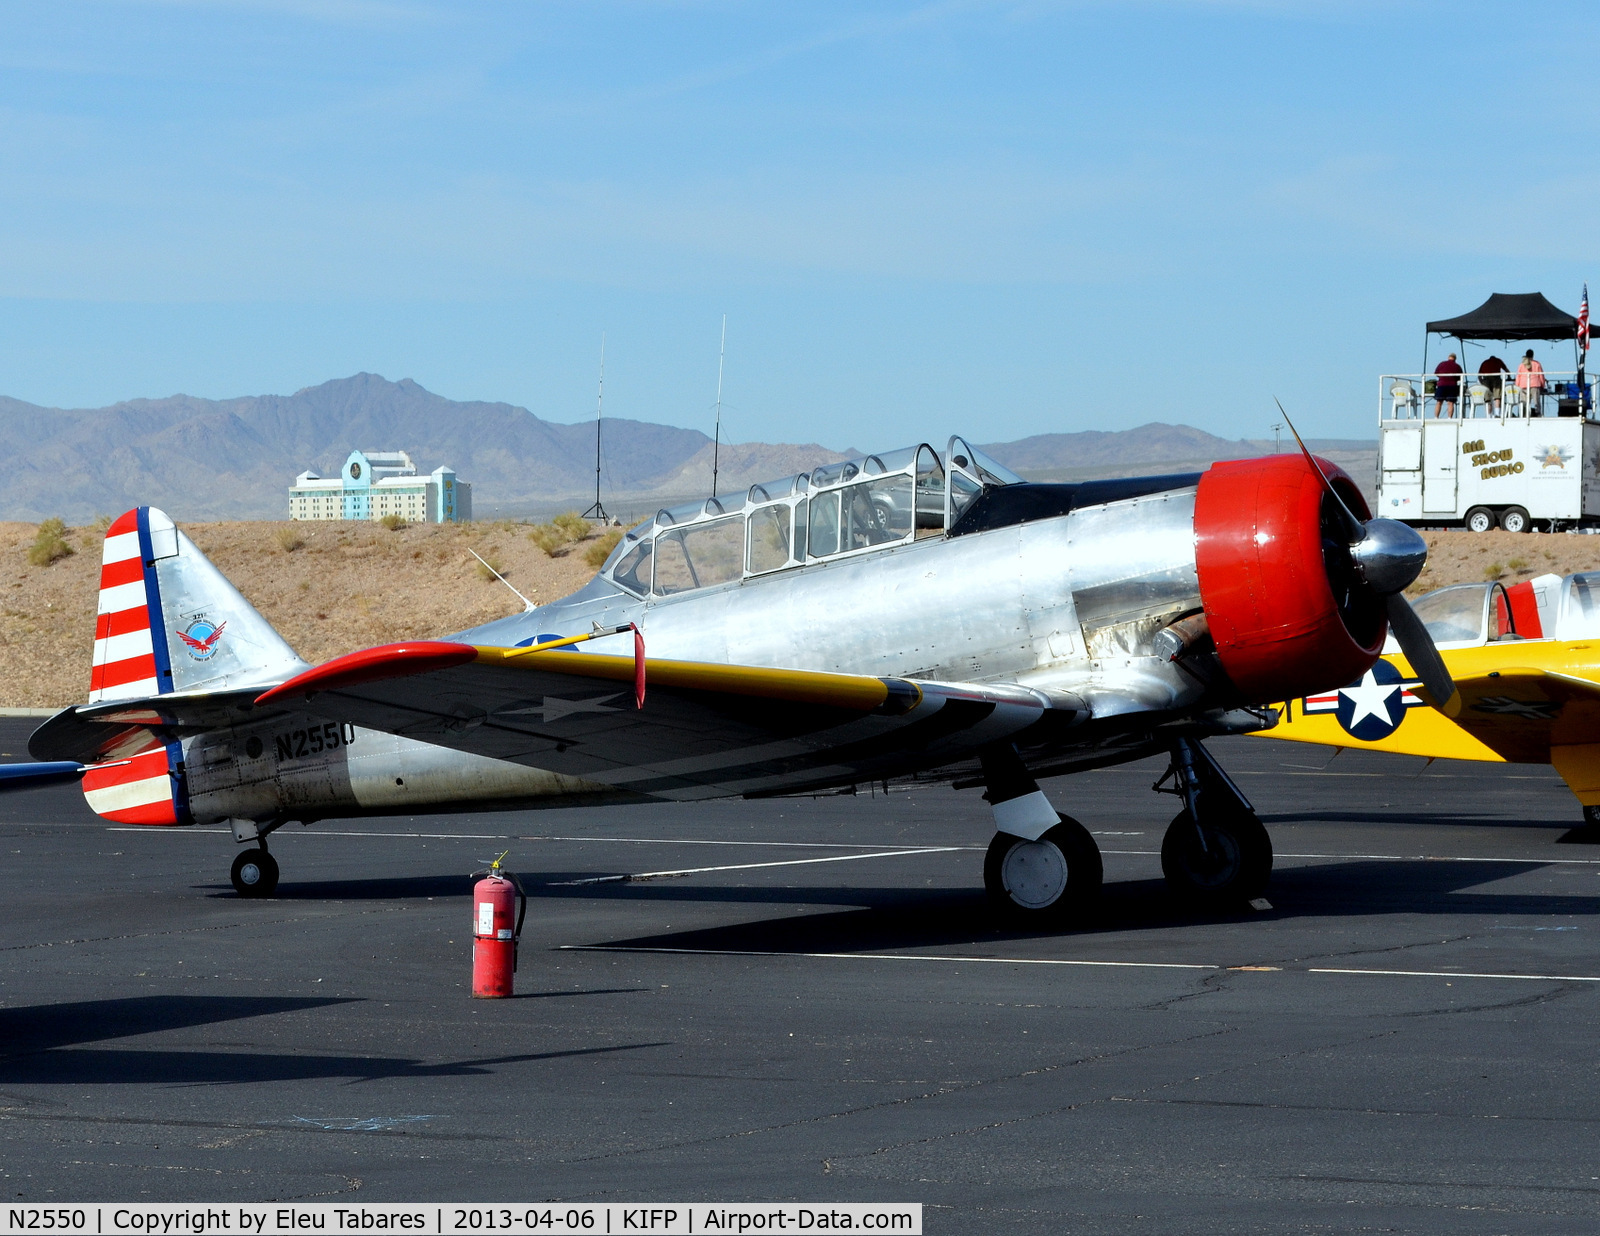 N2550, 1985 North American SNJ-5 Texan C/N 43683, Taken during Legends Over The Colorado River in Bullhead City, Airzona.